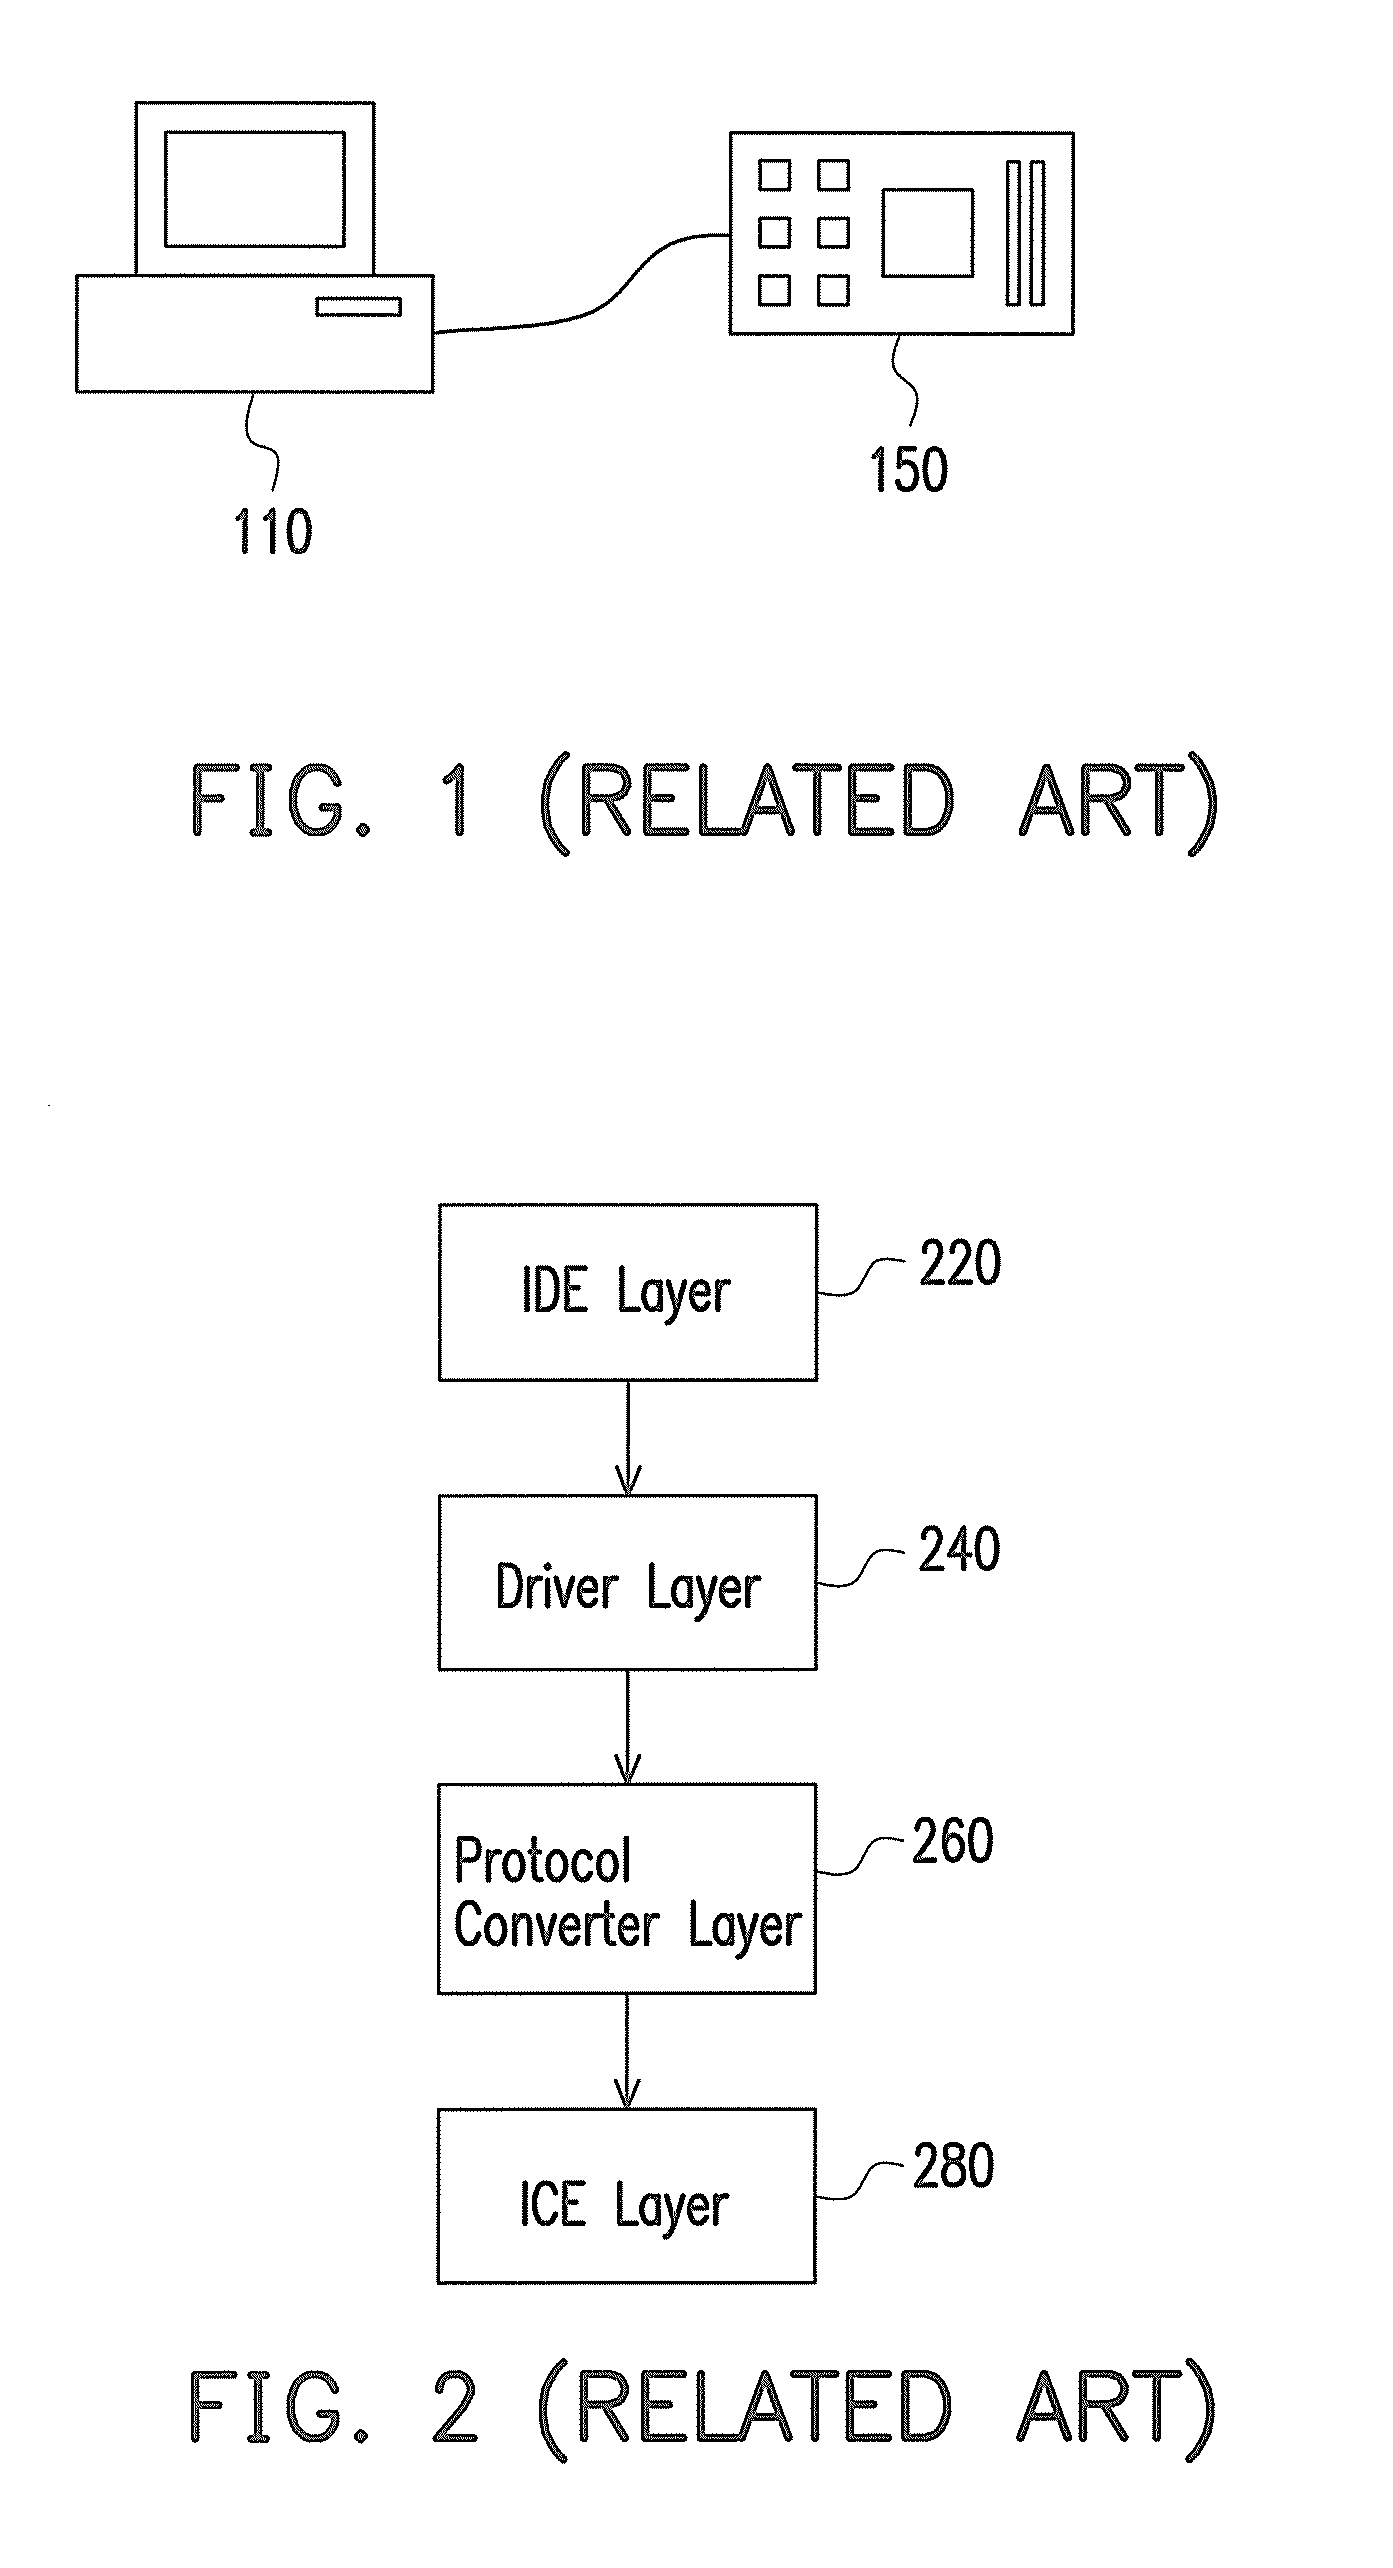 System and method for multi-core synchronous debugging of a multi-core platform